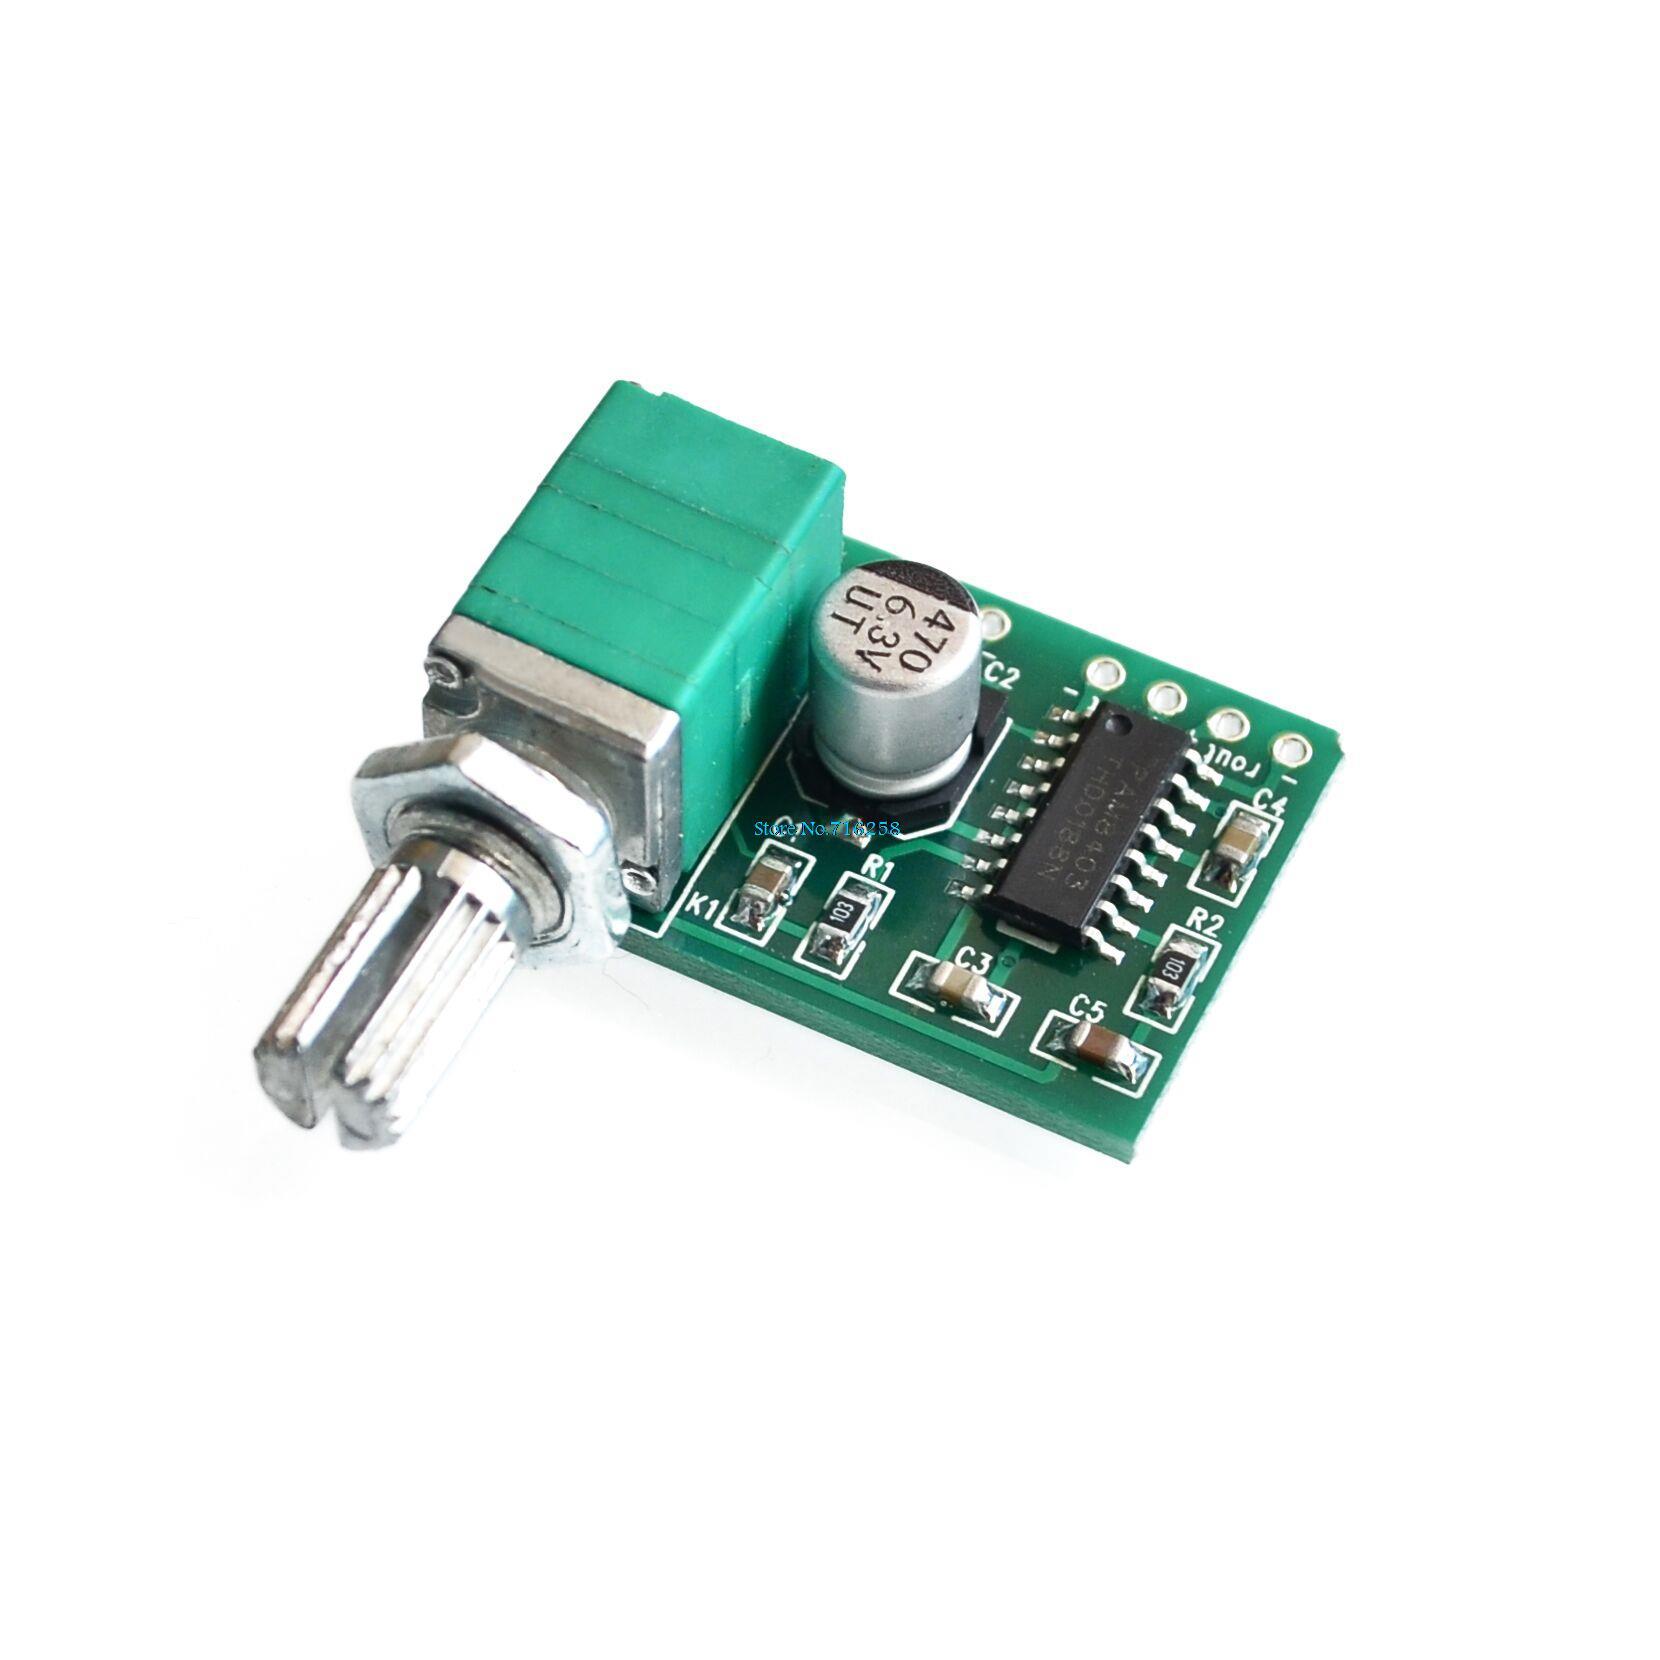 ! 10pcs/lot PAM8403 mini 5V digital amplifier board with switch potentiometer can be USB powered GF1002